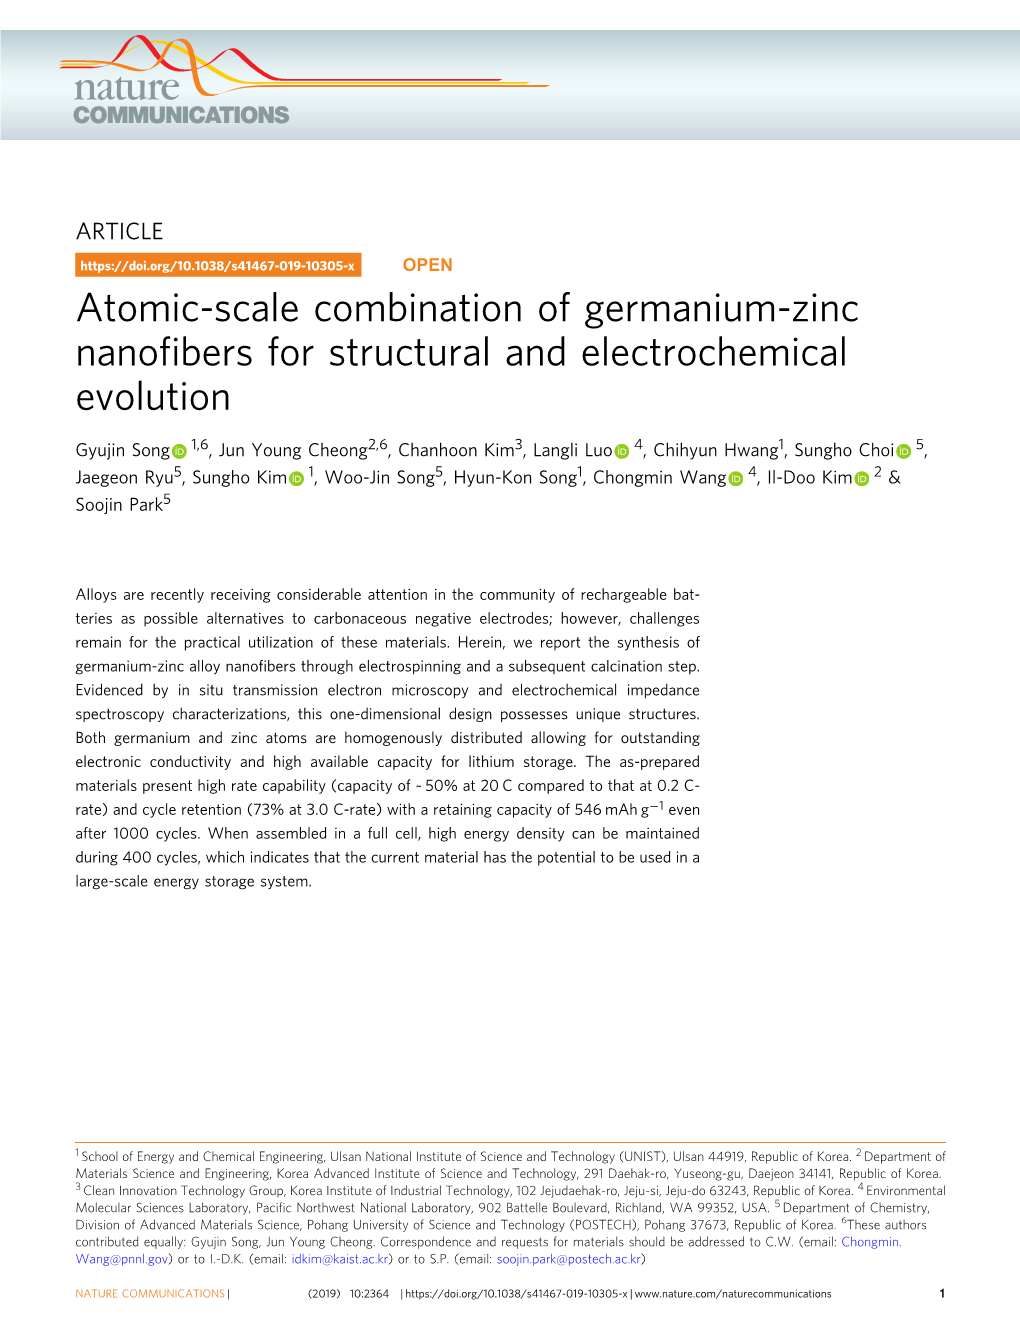 Atomic-Scale Combination of Germanium-Zinc Nanofibers for Structural and Electrochemical Evolution